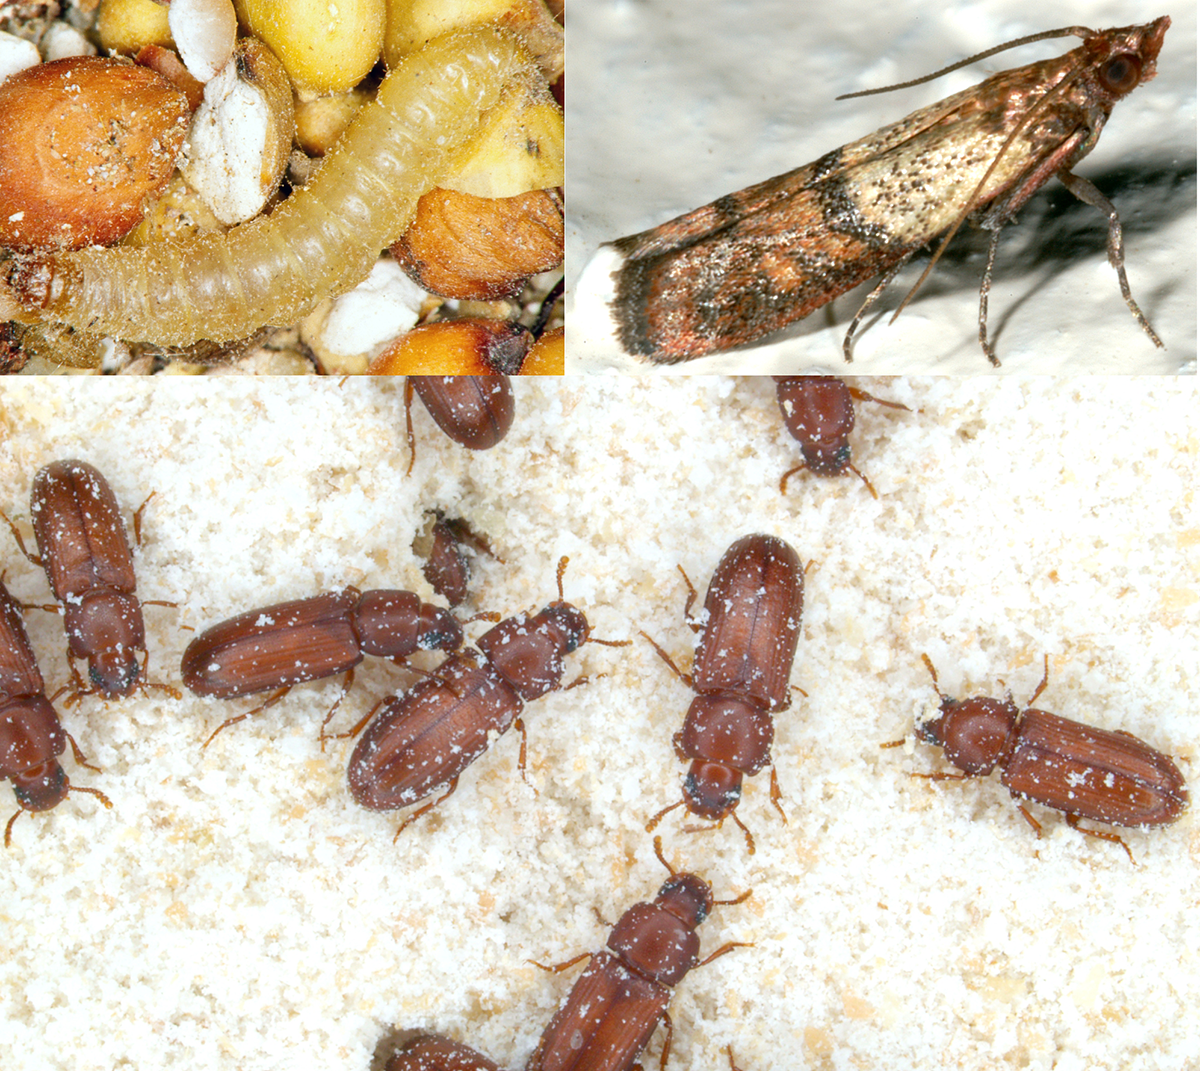 mealworms in grain, pantry beetles in white flour